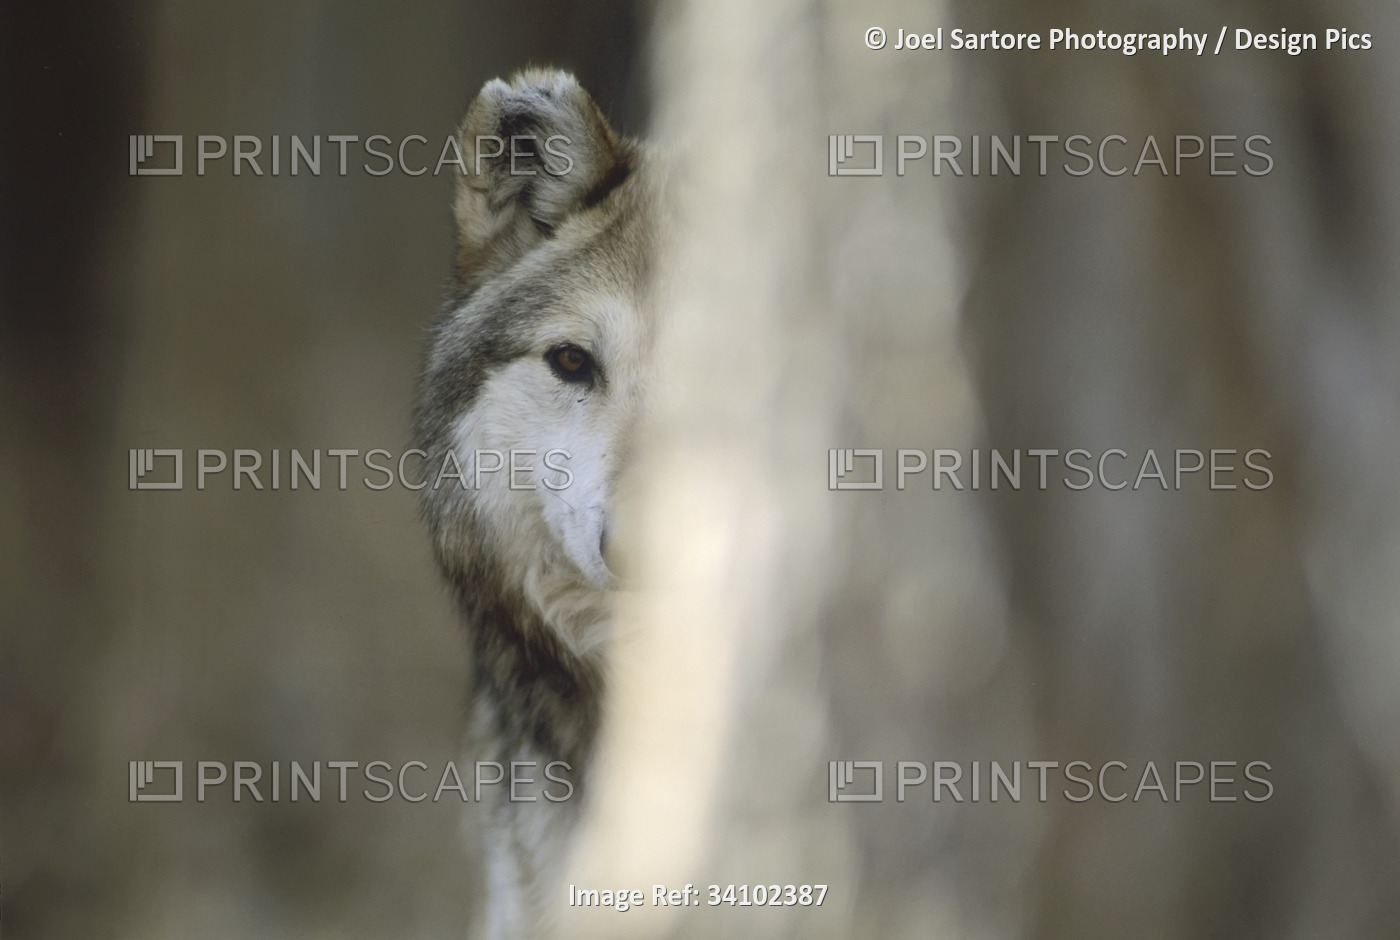 Captive Mexican gray wolf (Canis lupus baileyi), rarest wolf in North America; ...